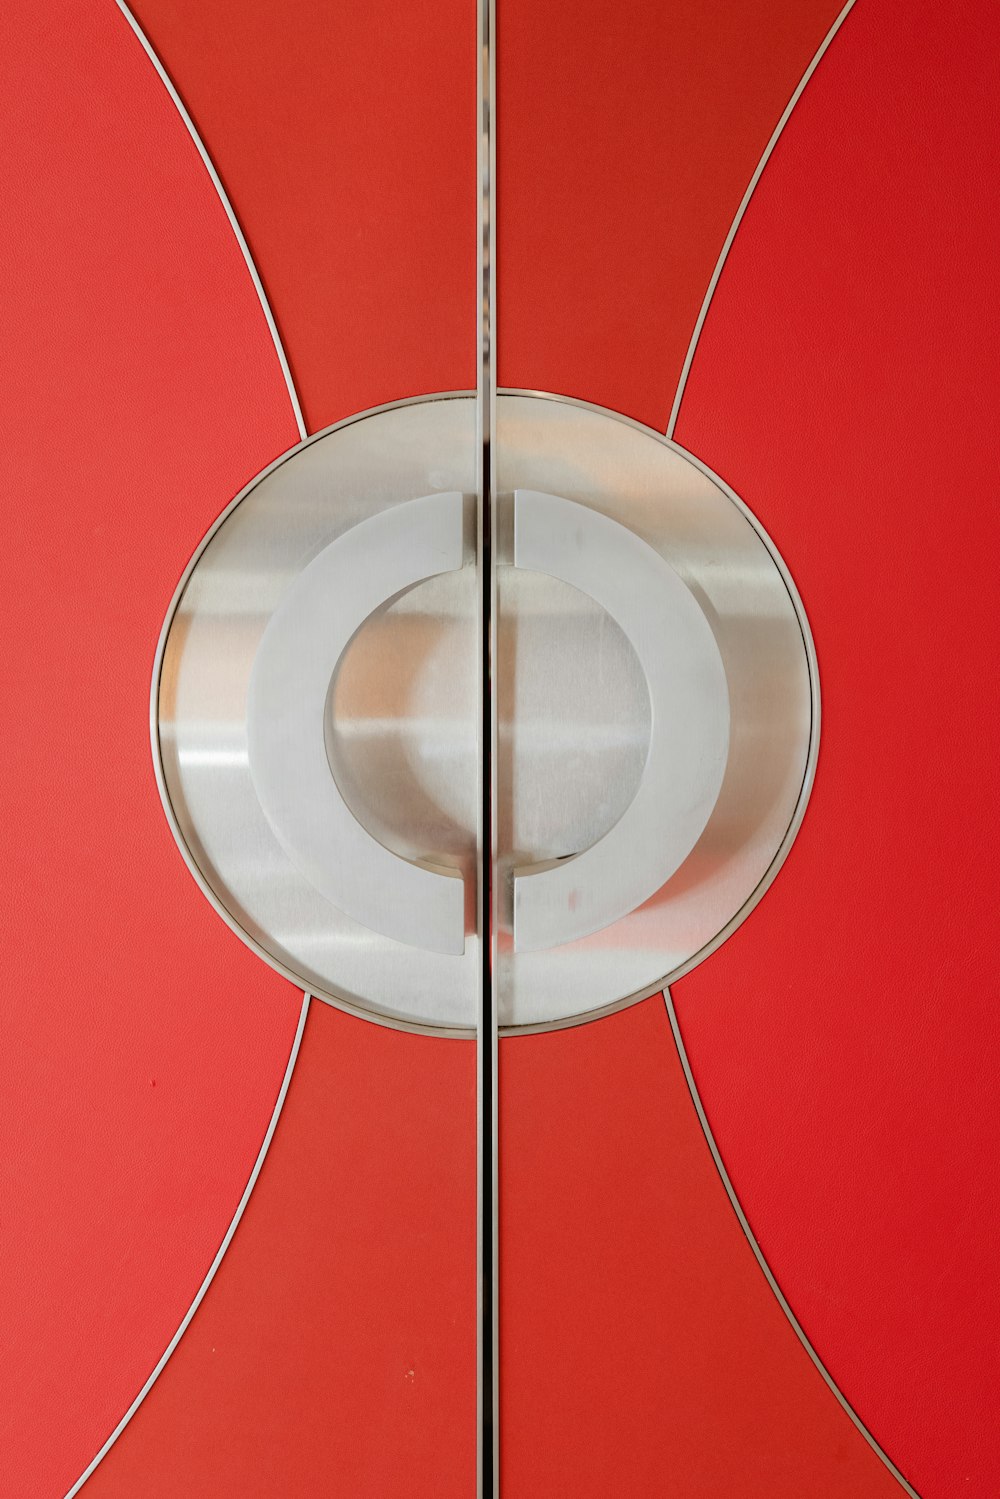 a close up of a metal door with a red background